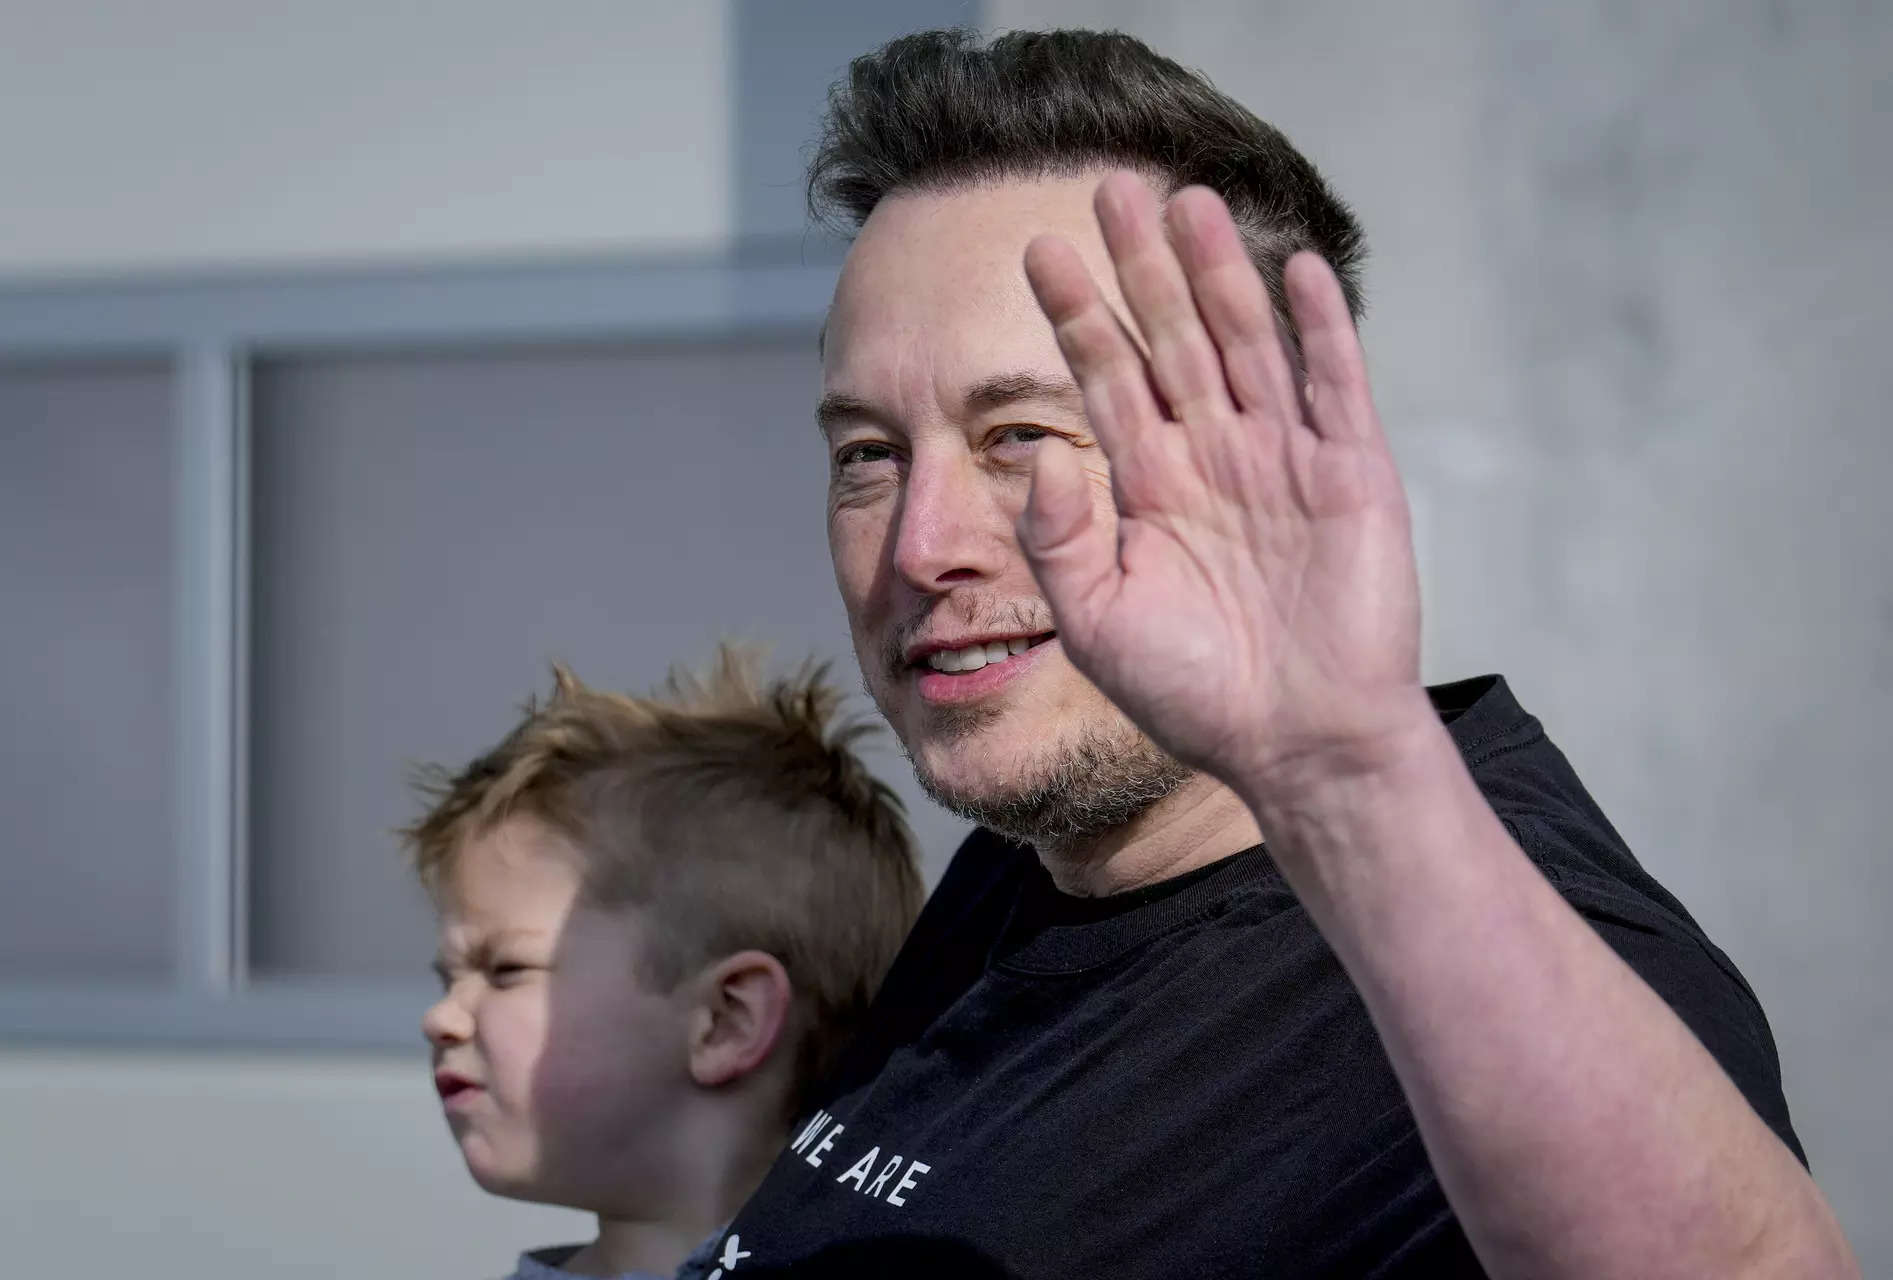 Tesla asks investors to approve Musk’s $56 billion pay again